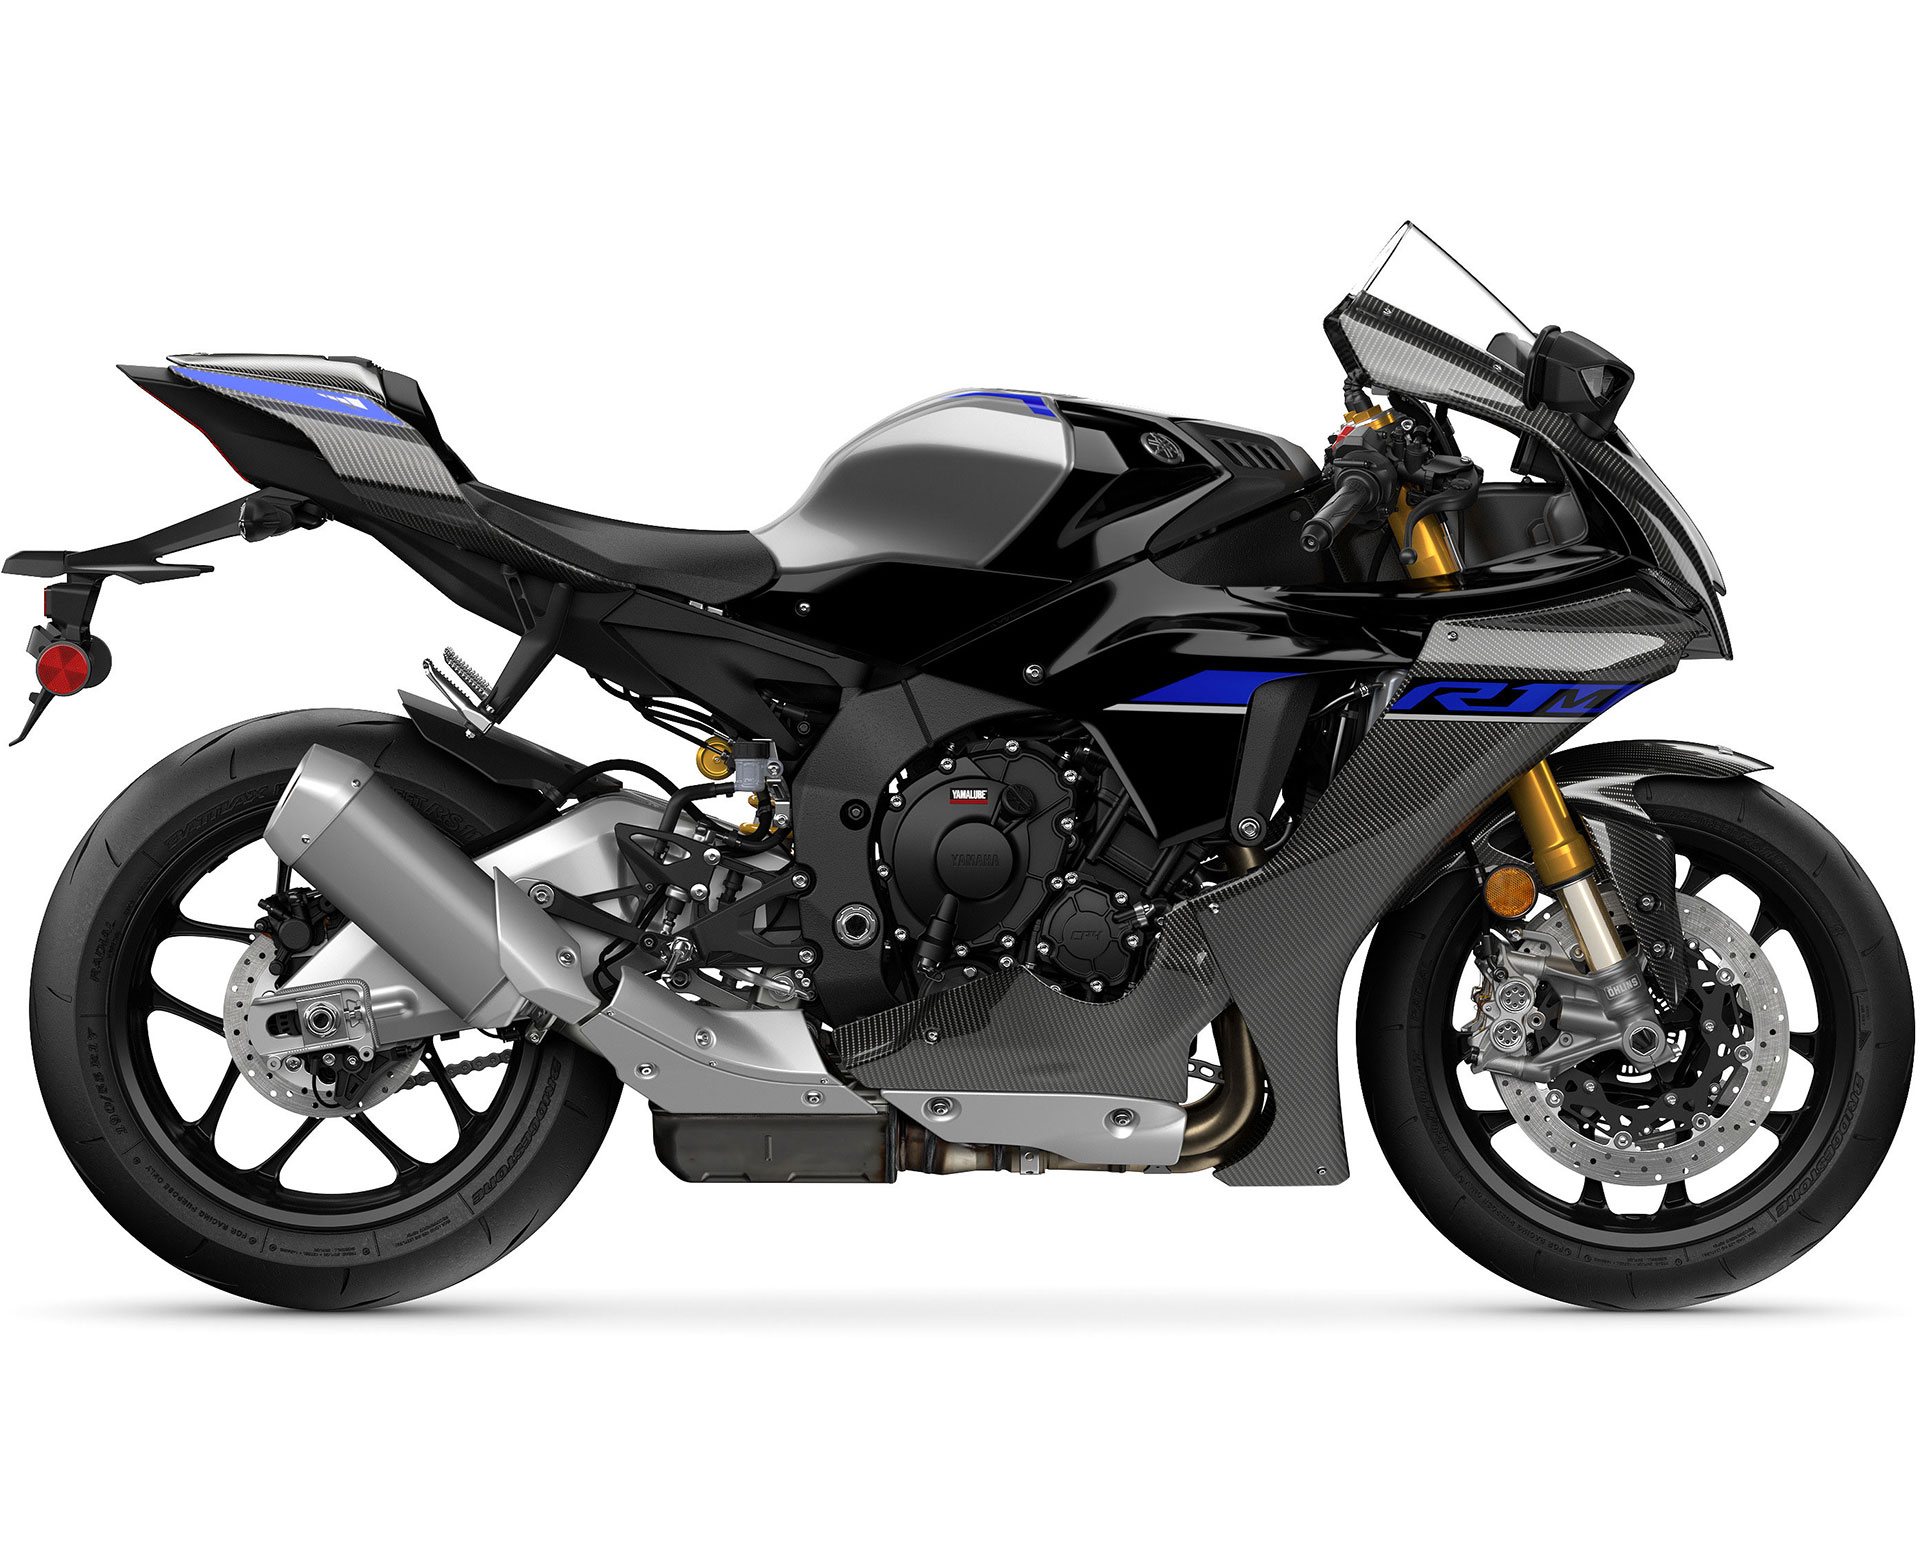 Thumbnail of your customized YZF-R1M 2024